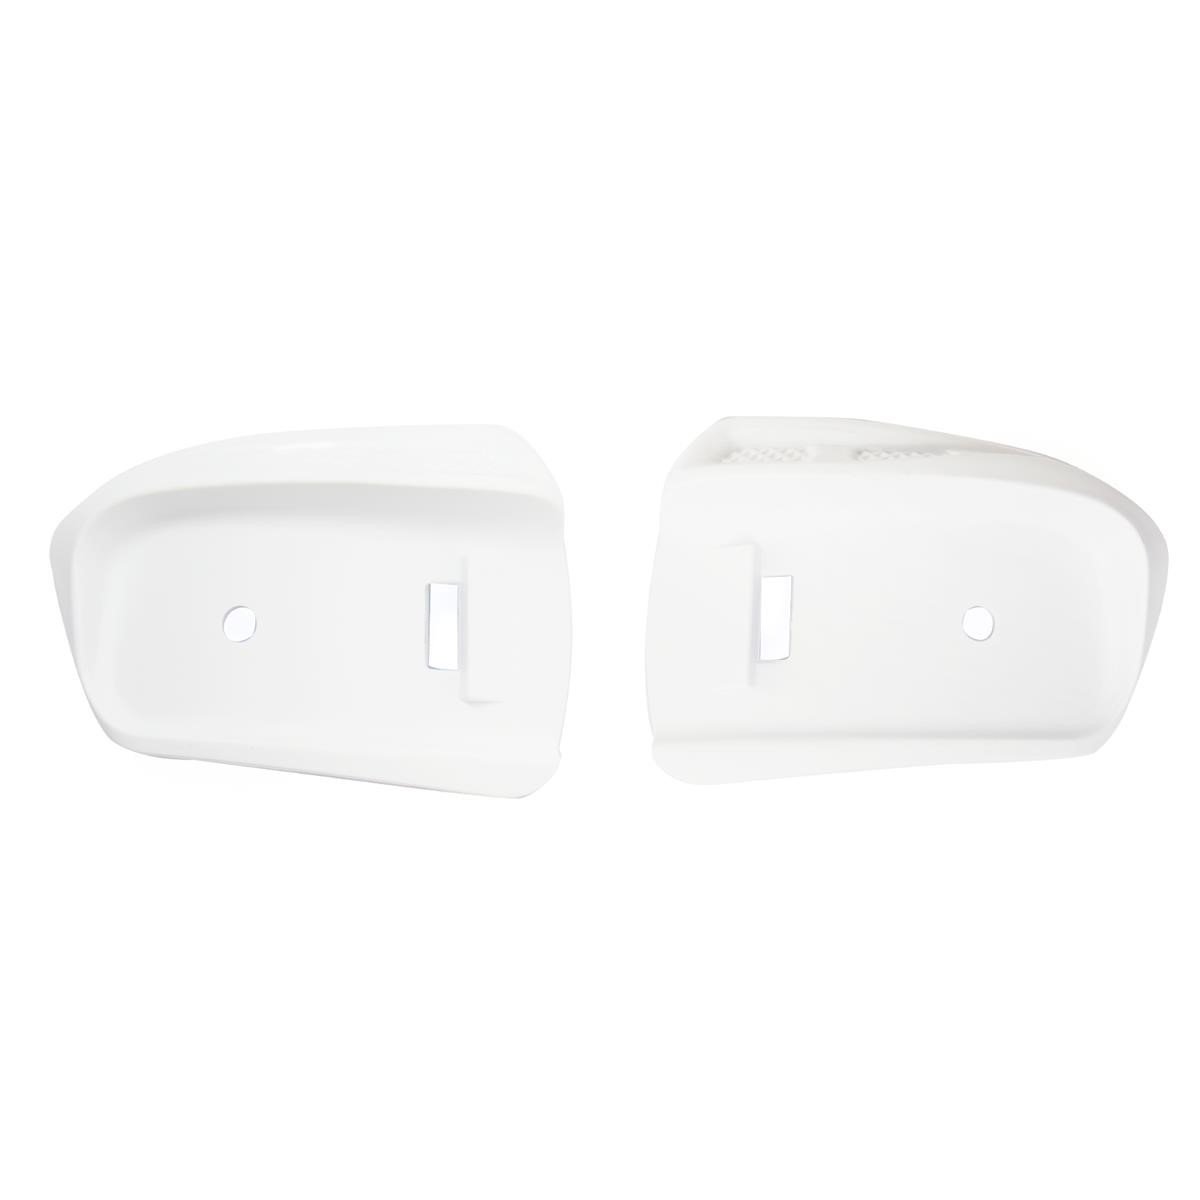 Alpinestars Replacement Buckle Base Tech 10 White, 2 Pack